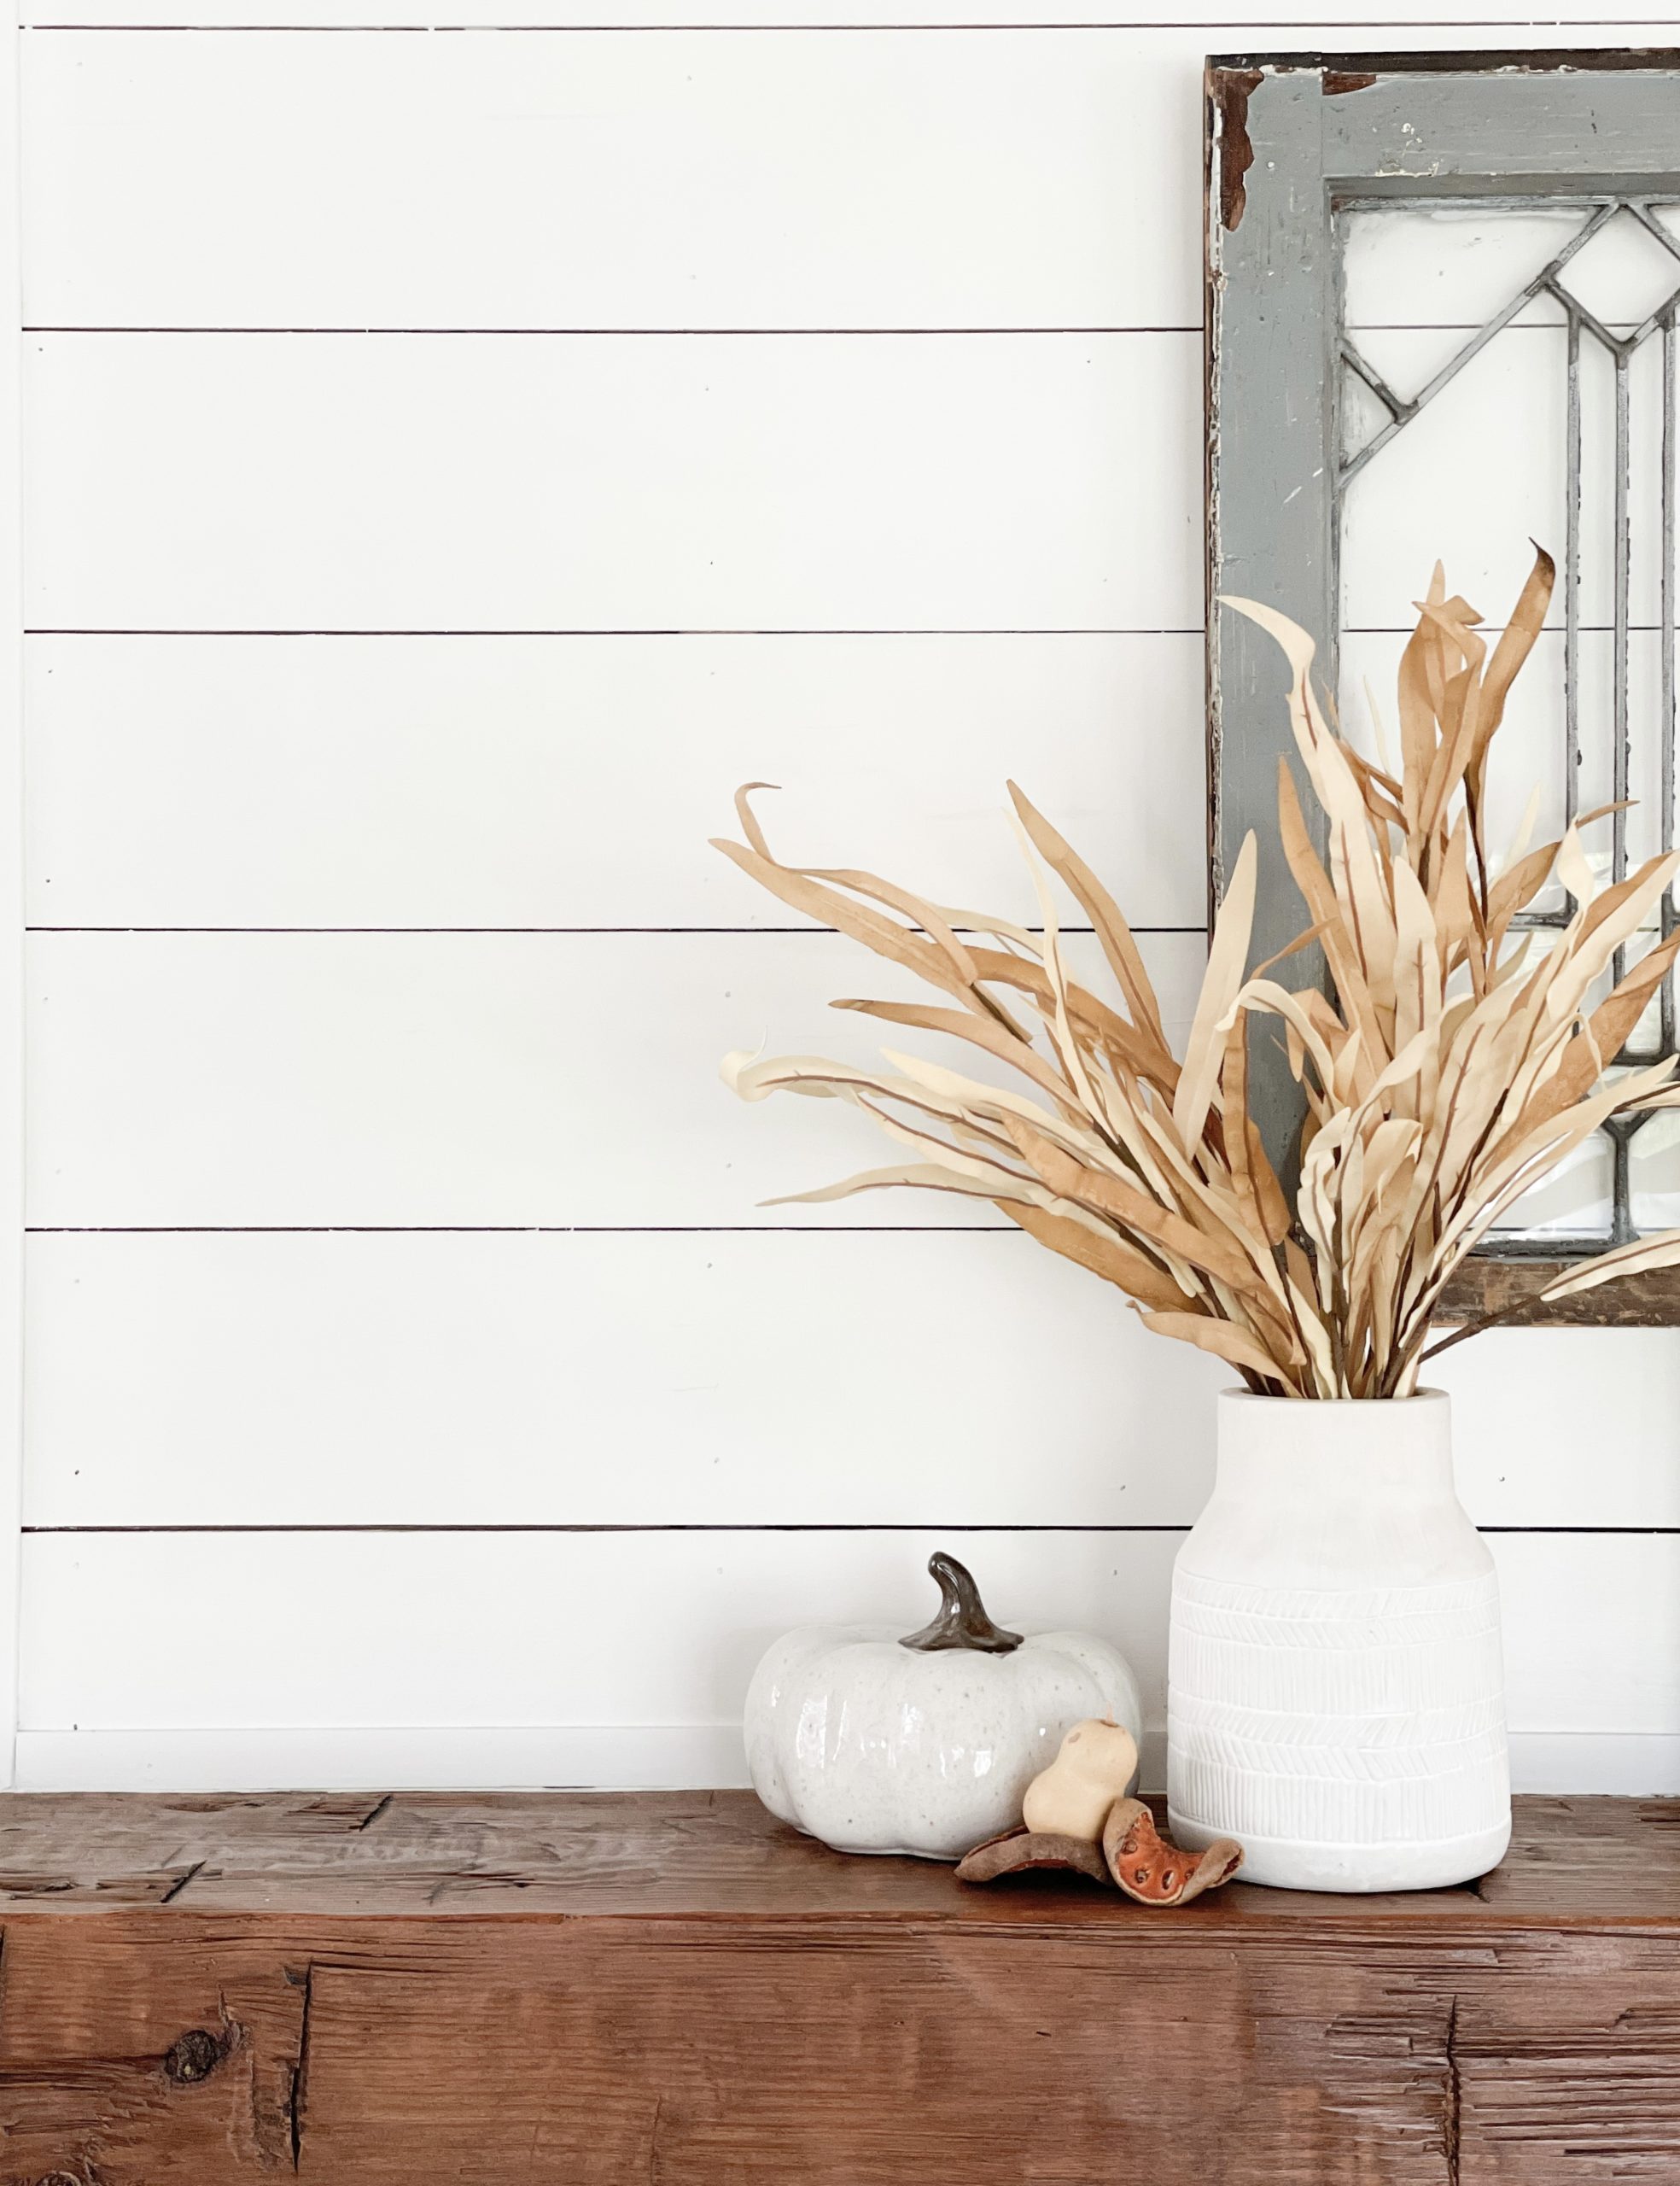 fallify your fireplace mantel fall fireplace mantel ideas with candlesticks and wheat sheaths sherwin williams accessible beige paint color shiplap walls